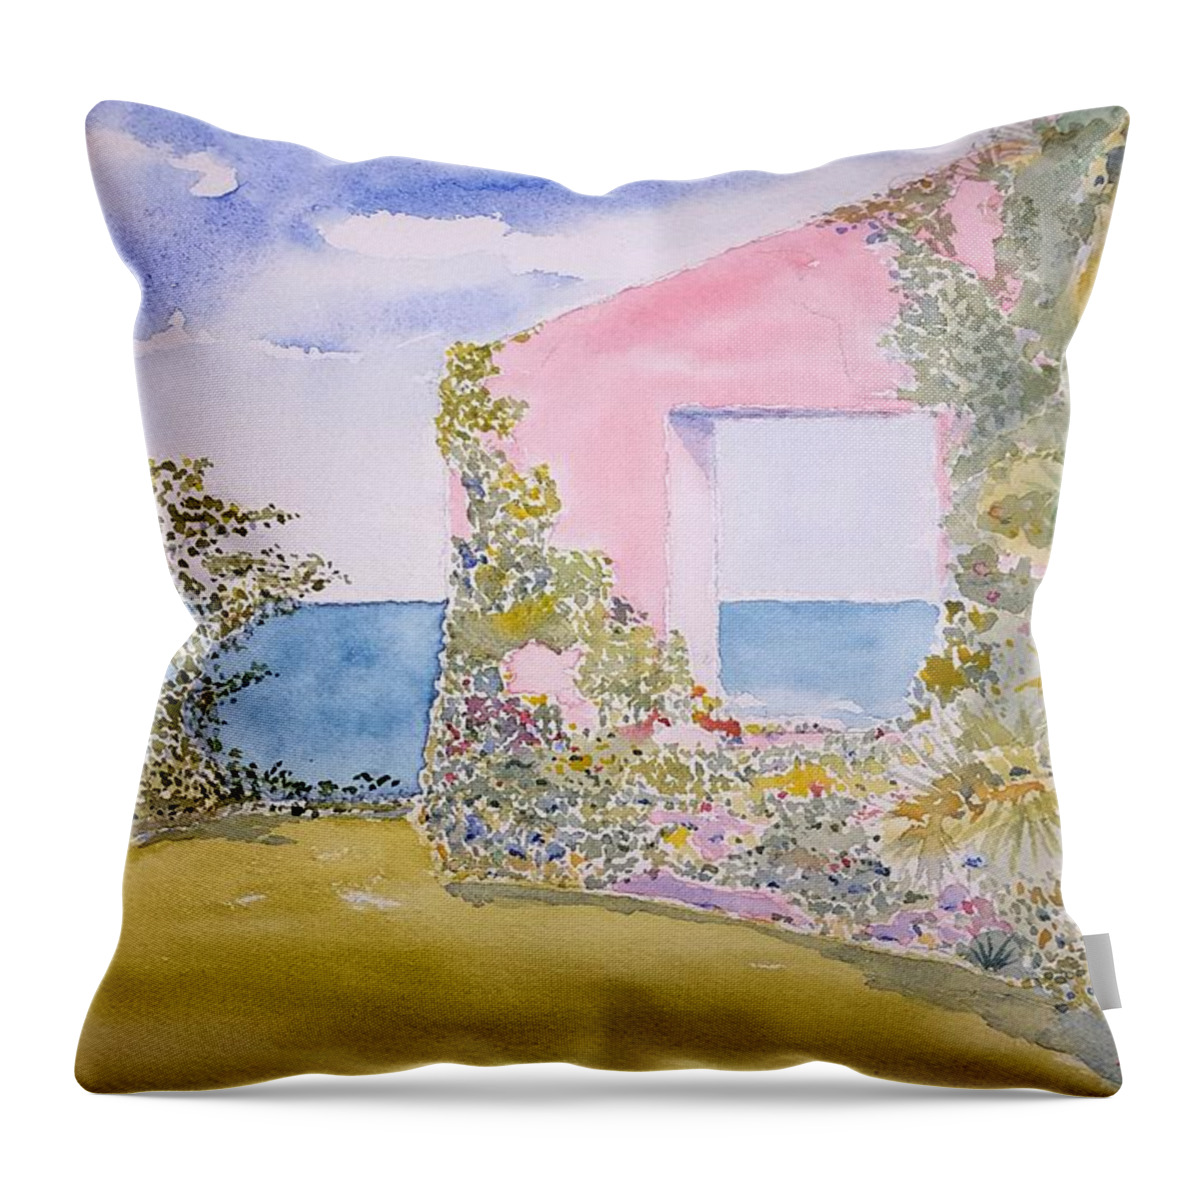 Watercolor Throw Pillow featuring the painting Tropical Lore by John Klobucher